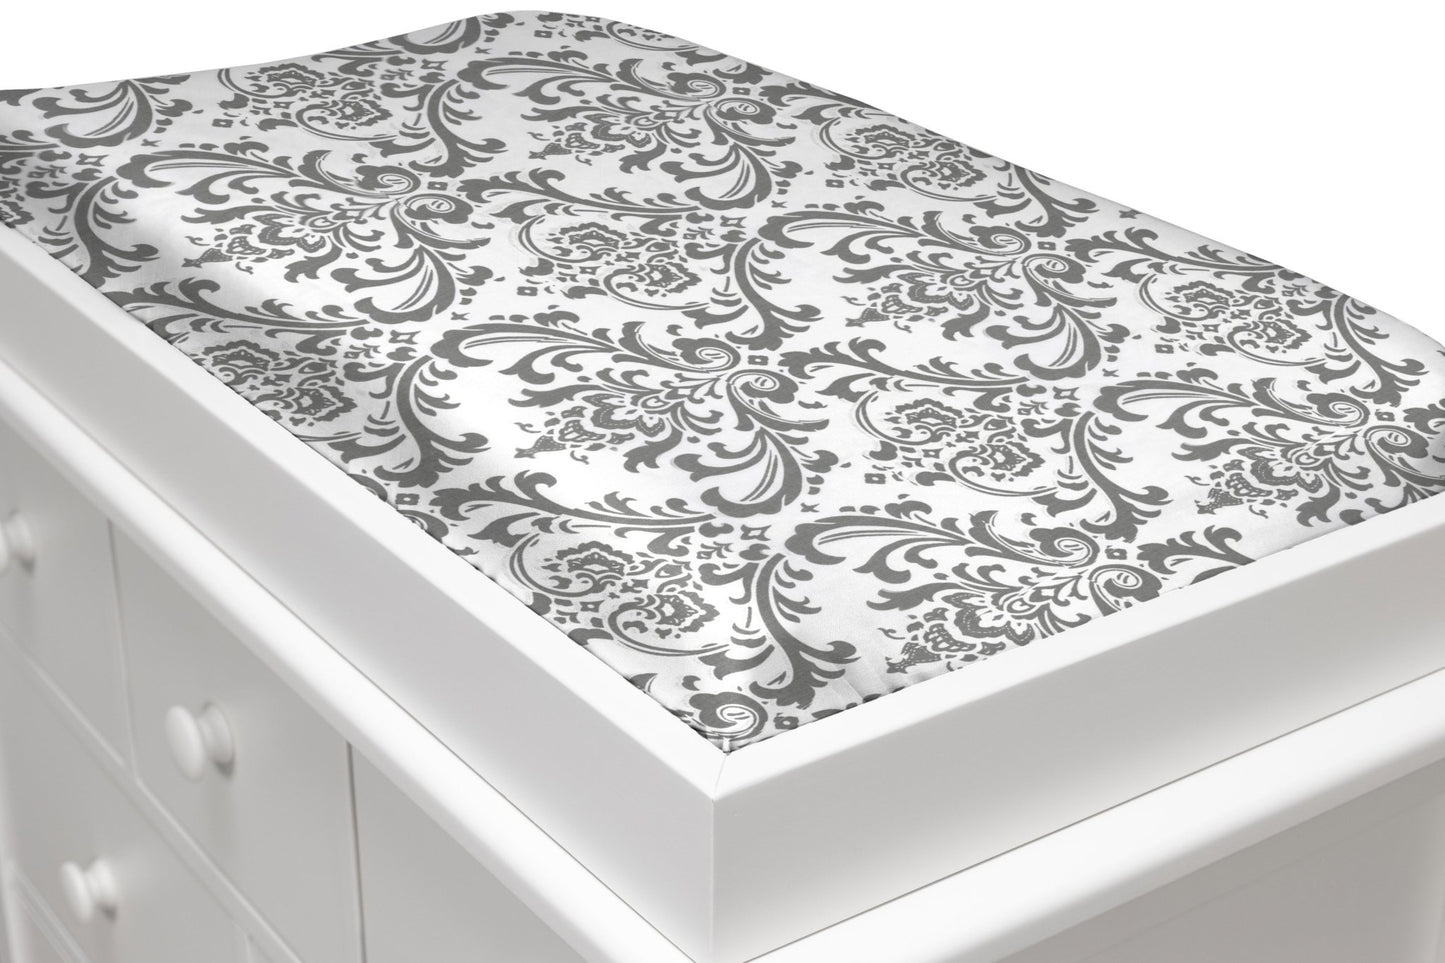 Gray Traditions Damask Changing Pad Cover - New Arrivals Inc